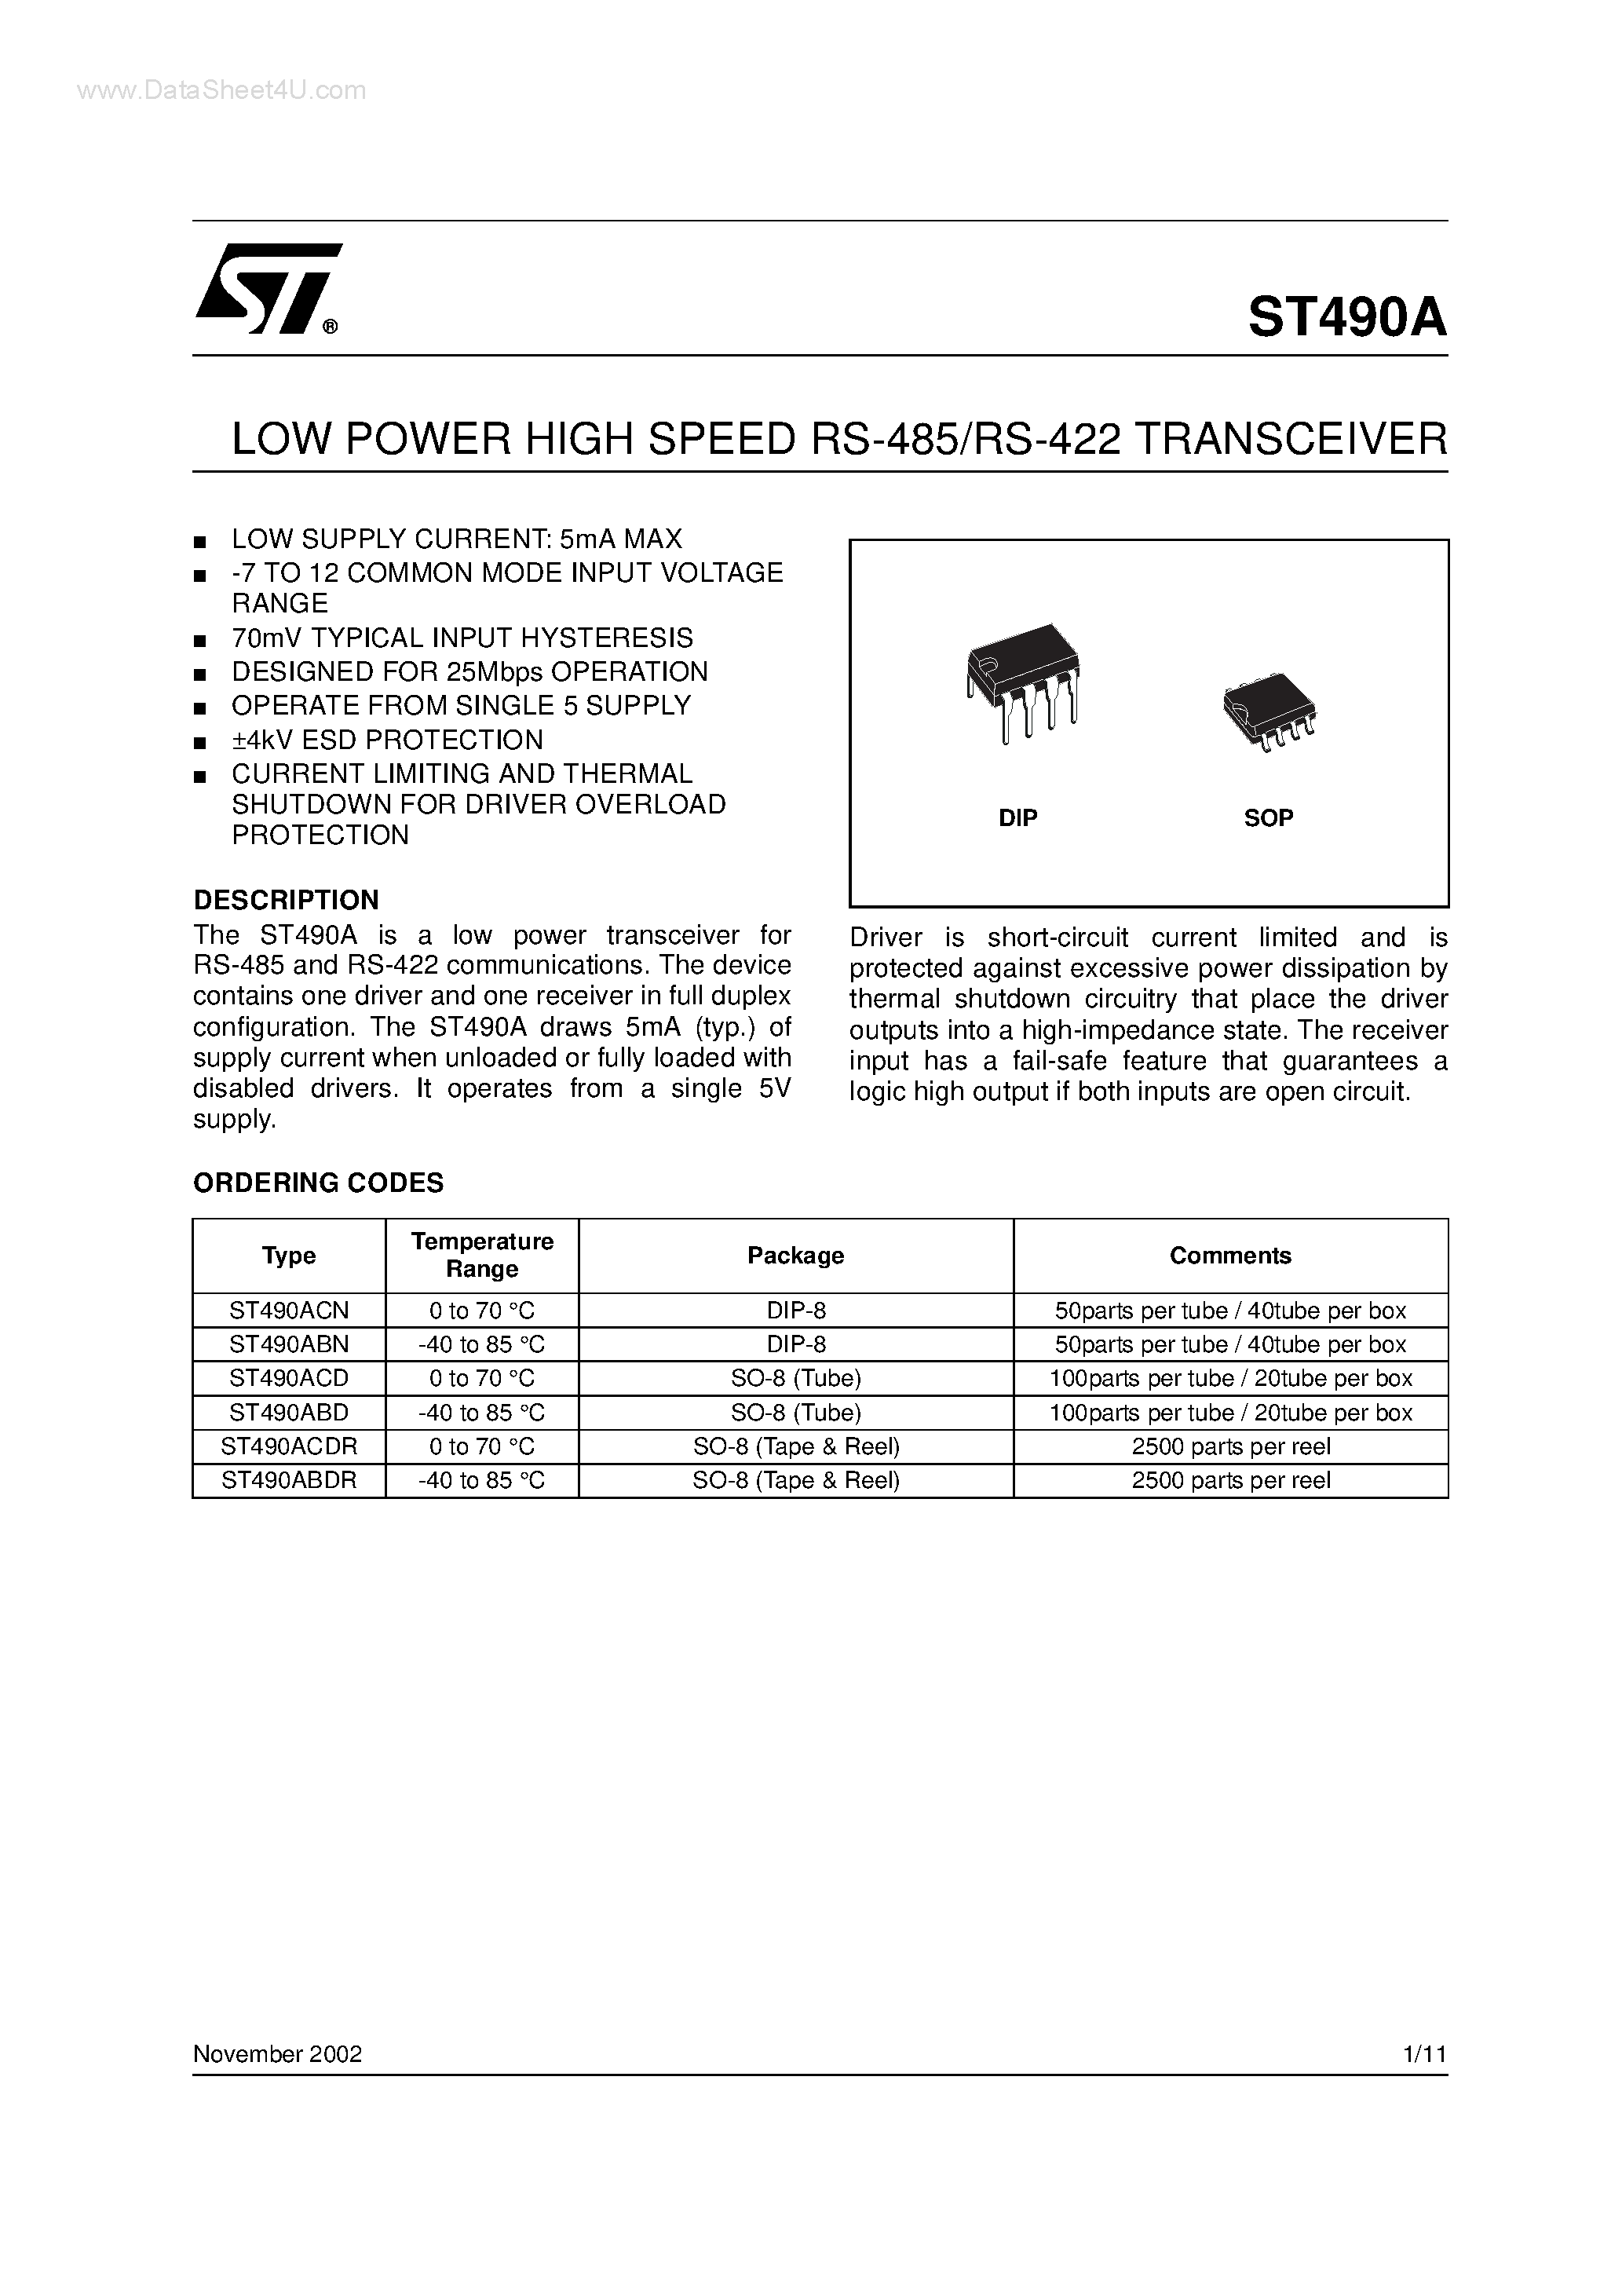 Datasheet ST490A - LOW POWER HIGH SPEED RS-485/RS-422 TRANSCEIVER page 1